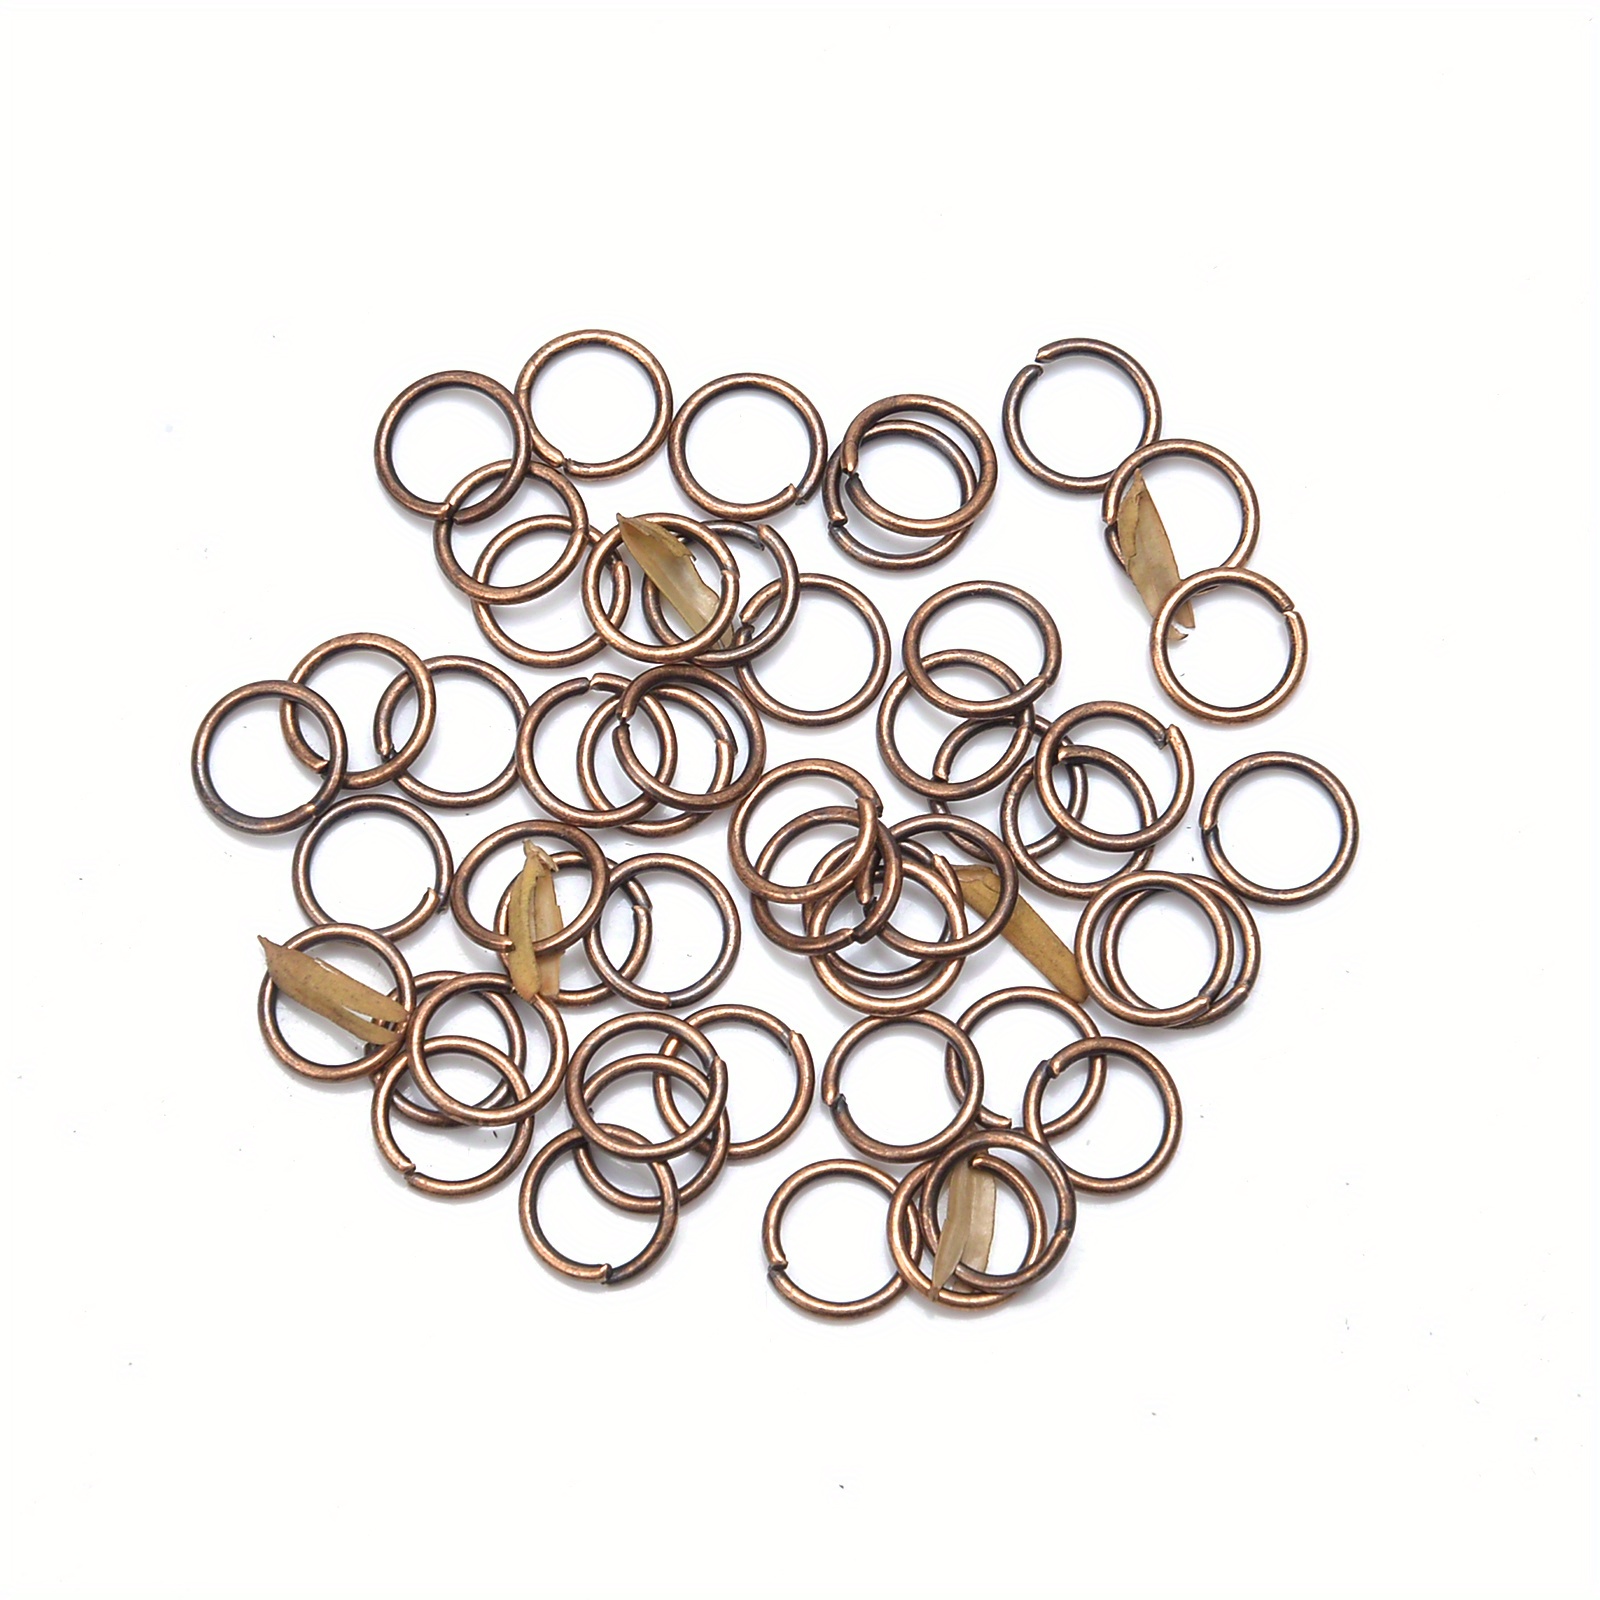 Lot of 8, Large Jump Rings, Vintage Jump Rings, 20mm Jump Rings, Brass Jump  Ring Lot, Vintage Jump Ring Lot, Jewelry Making, Jewelry Supply 